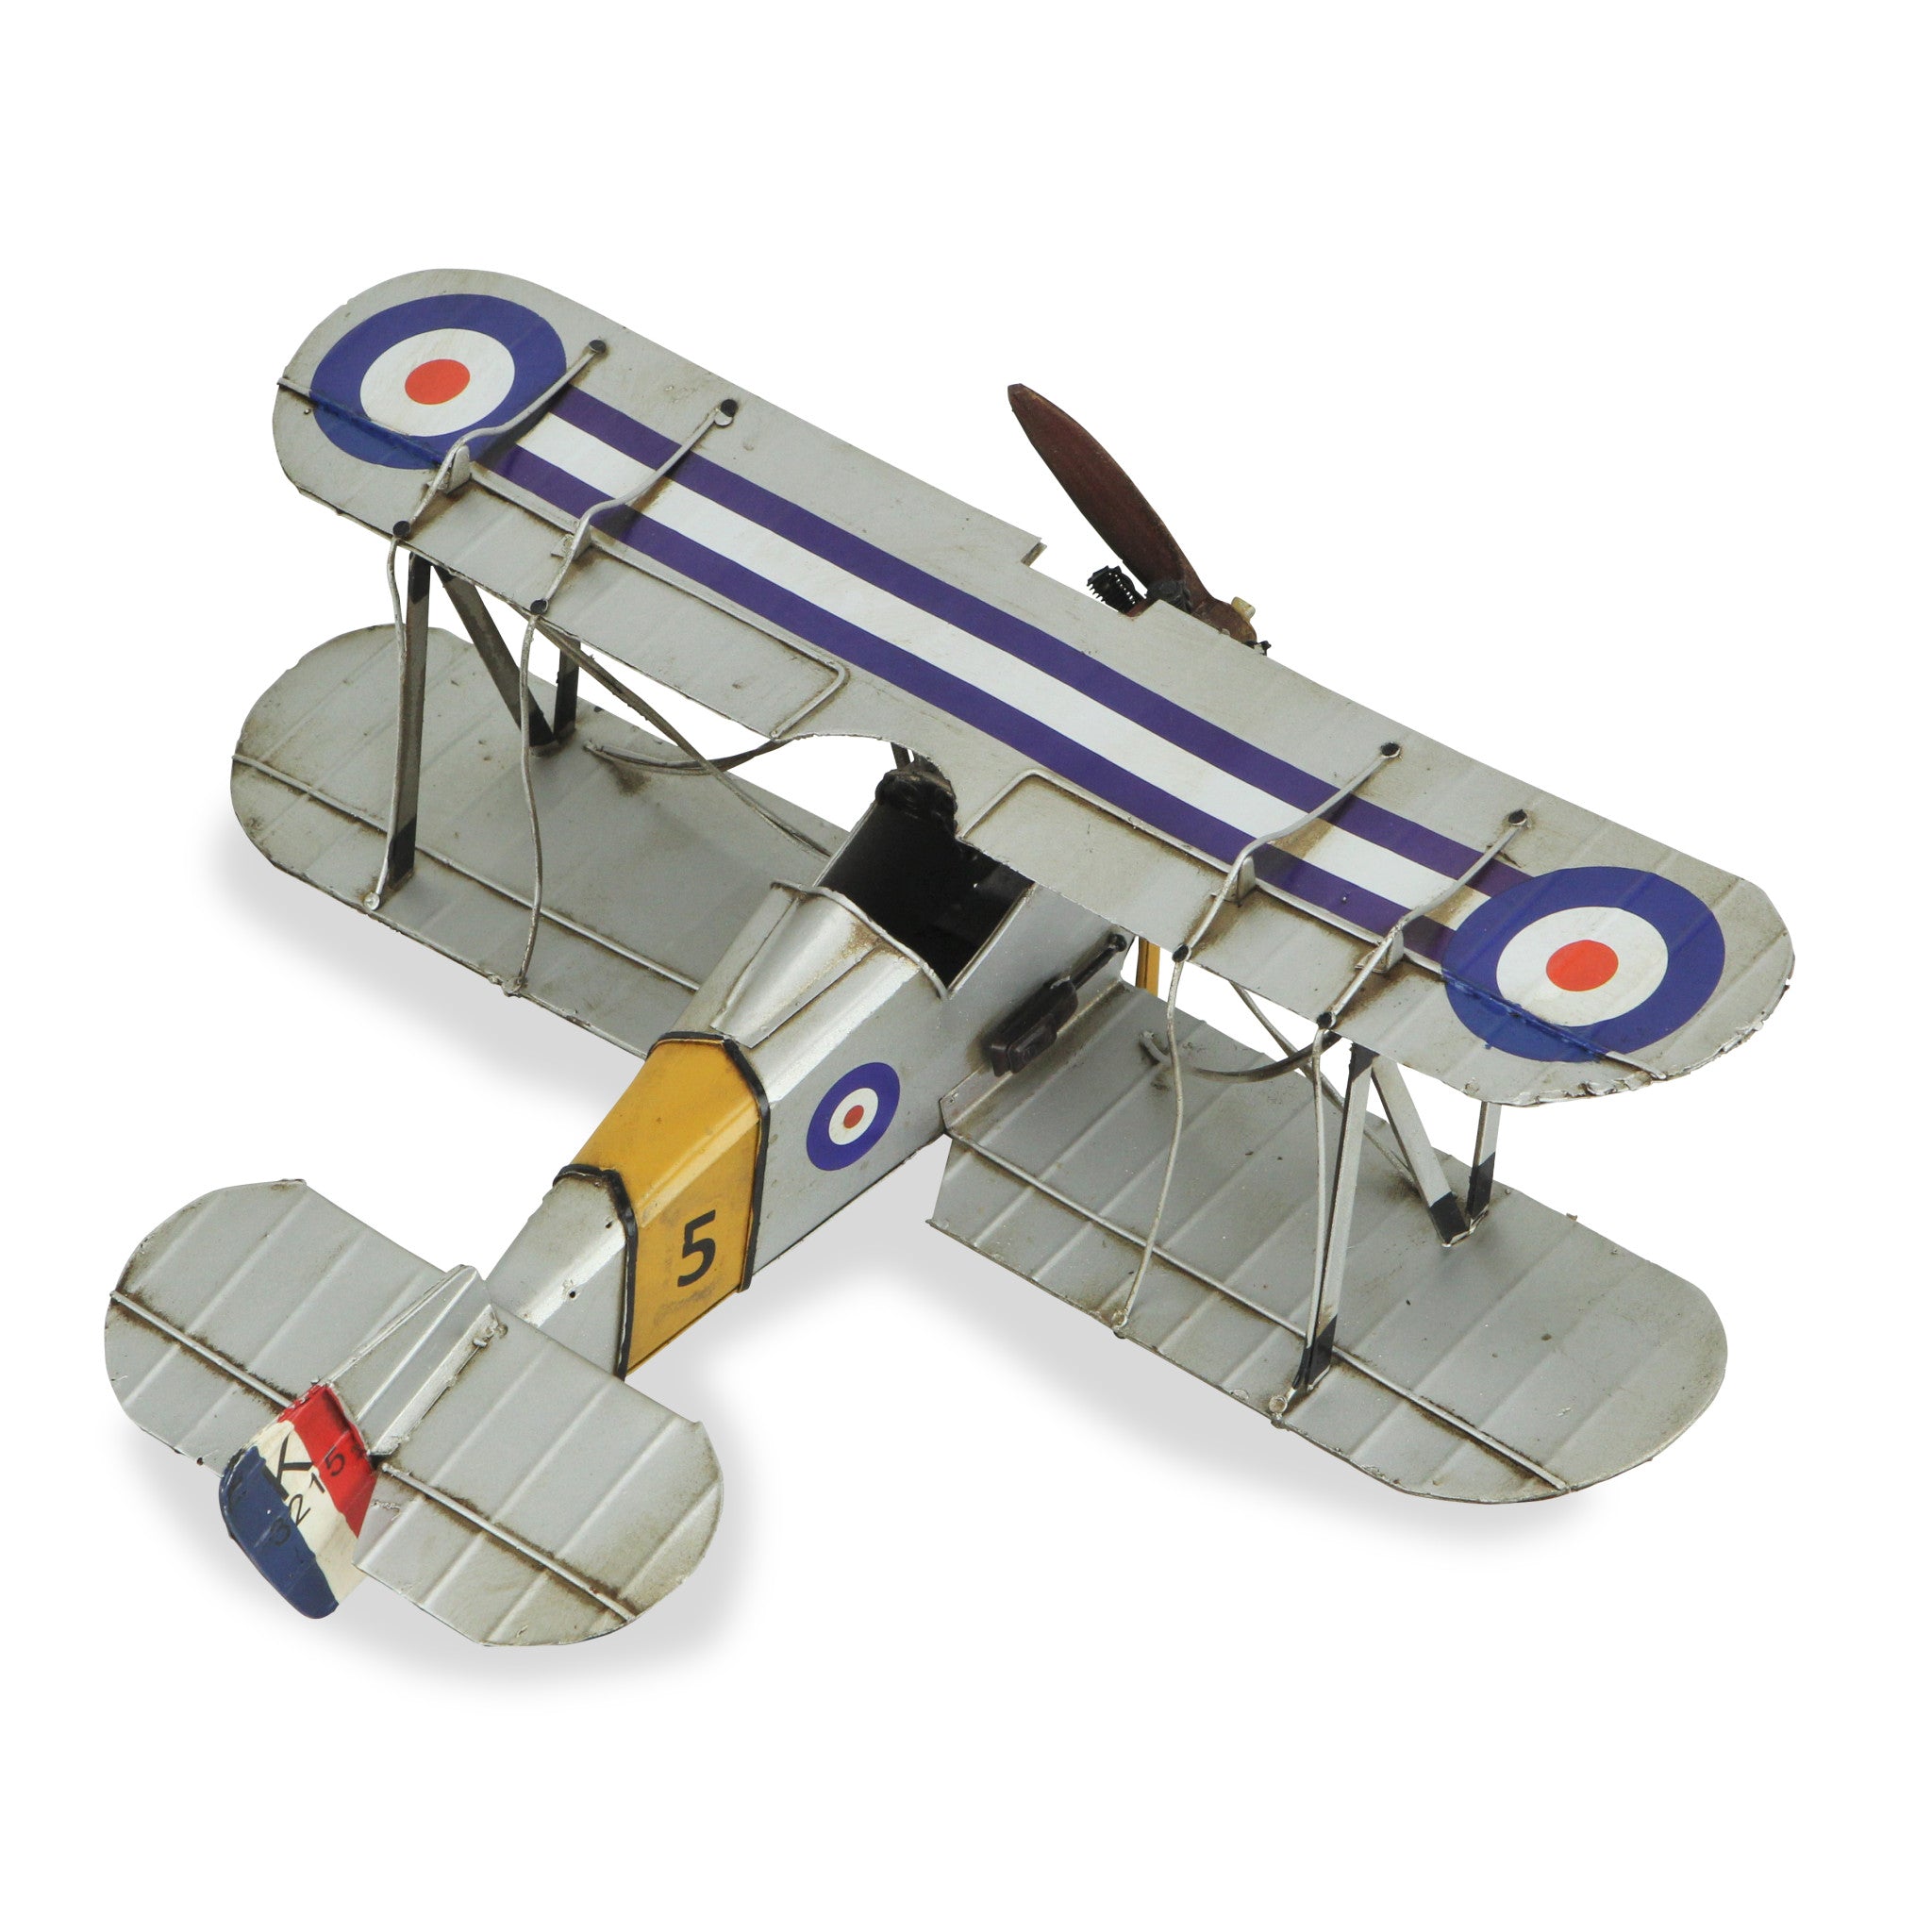 5" Blue and Gray Metal Hand Painted Model Airplane